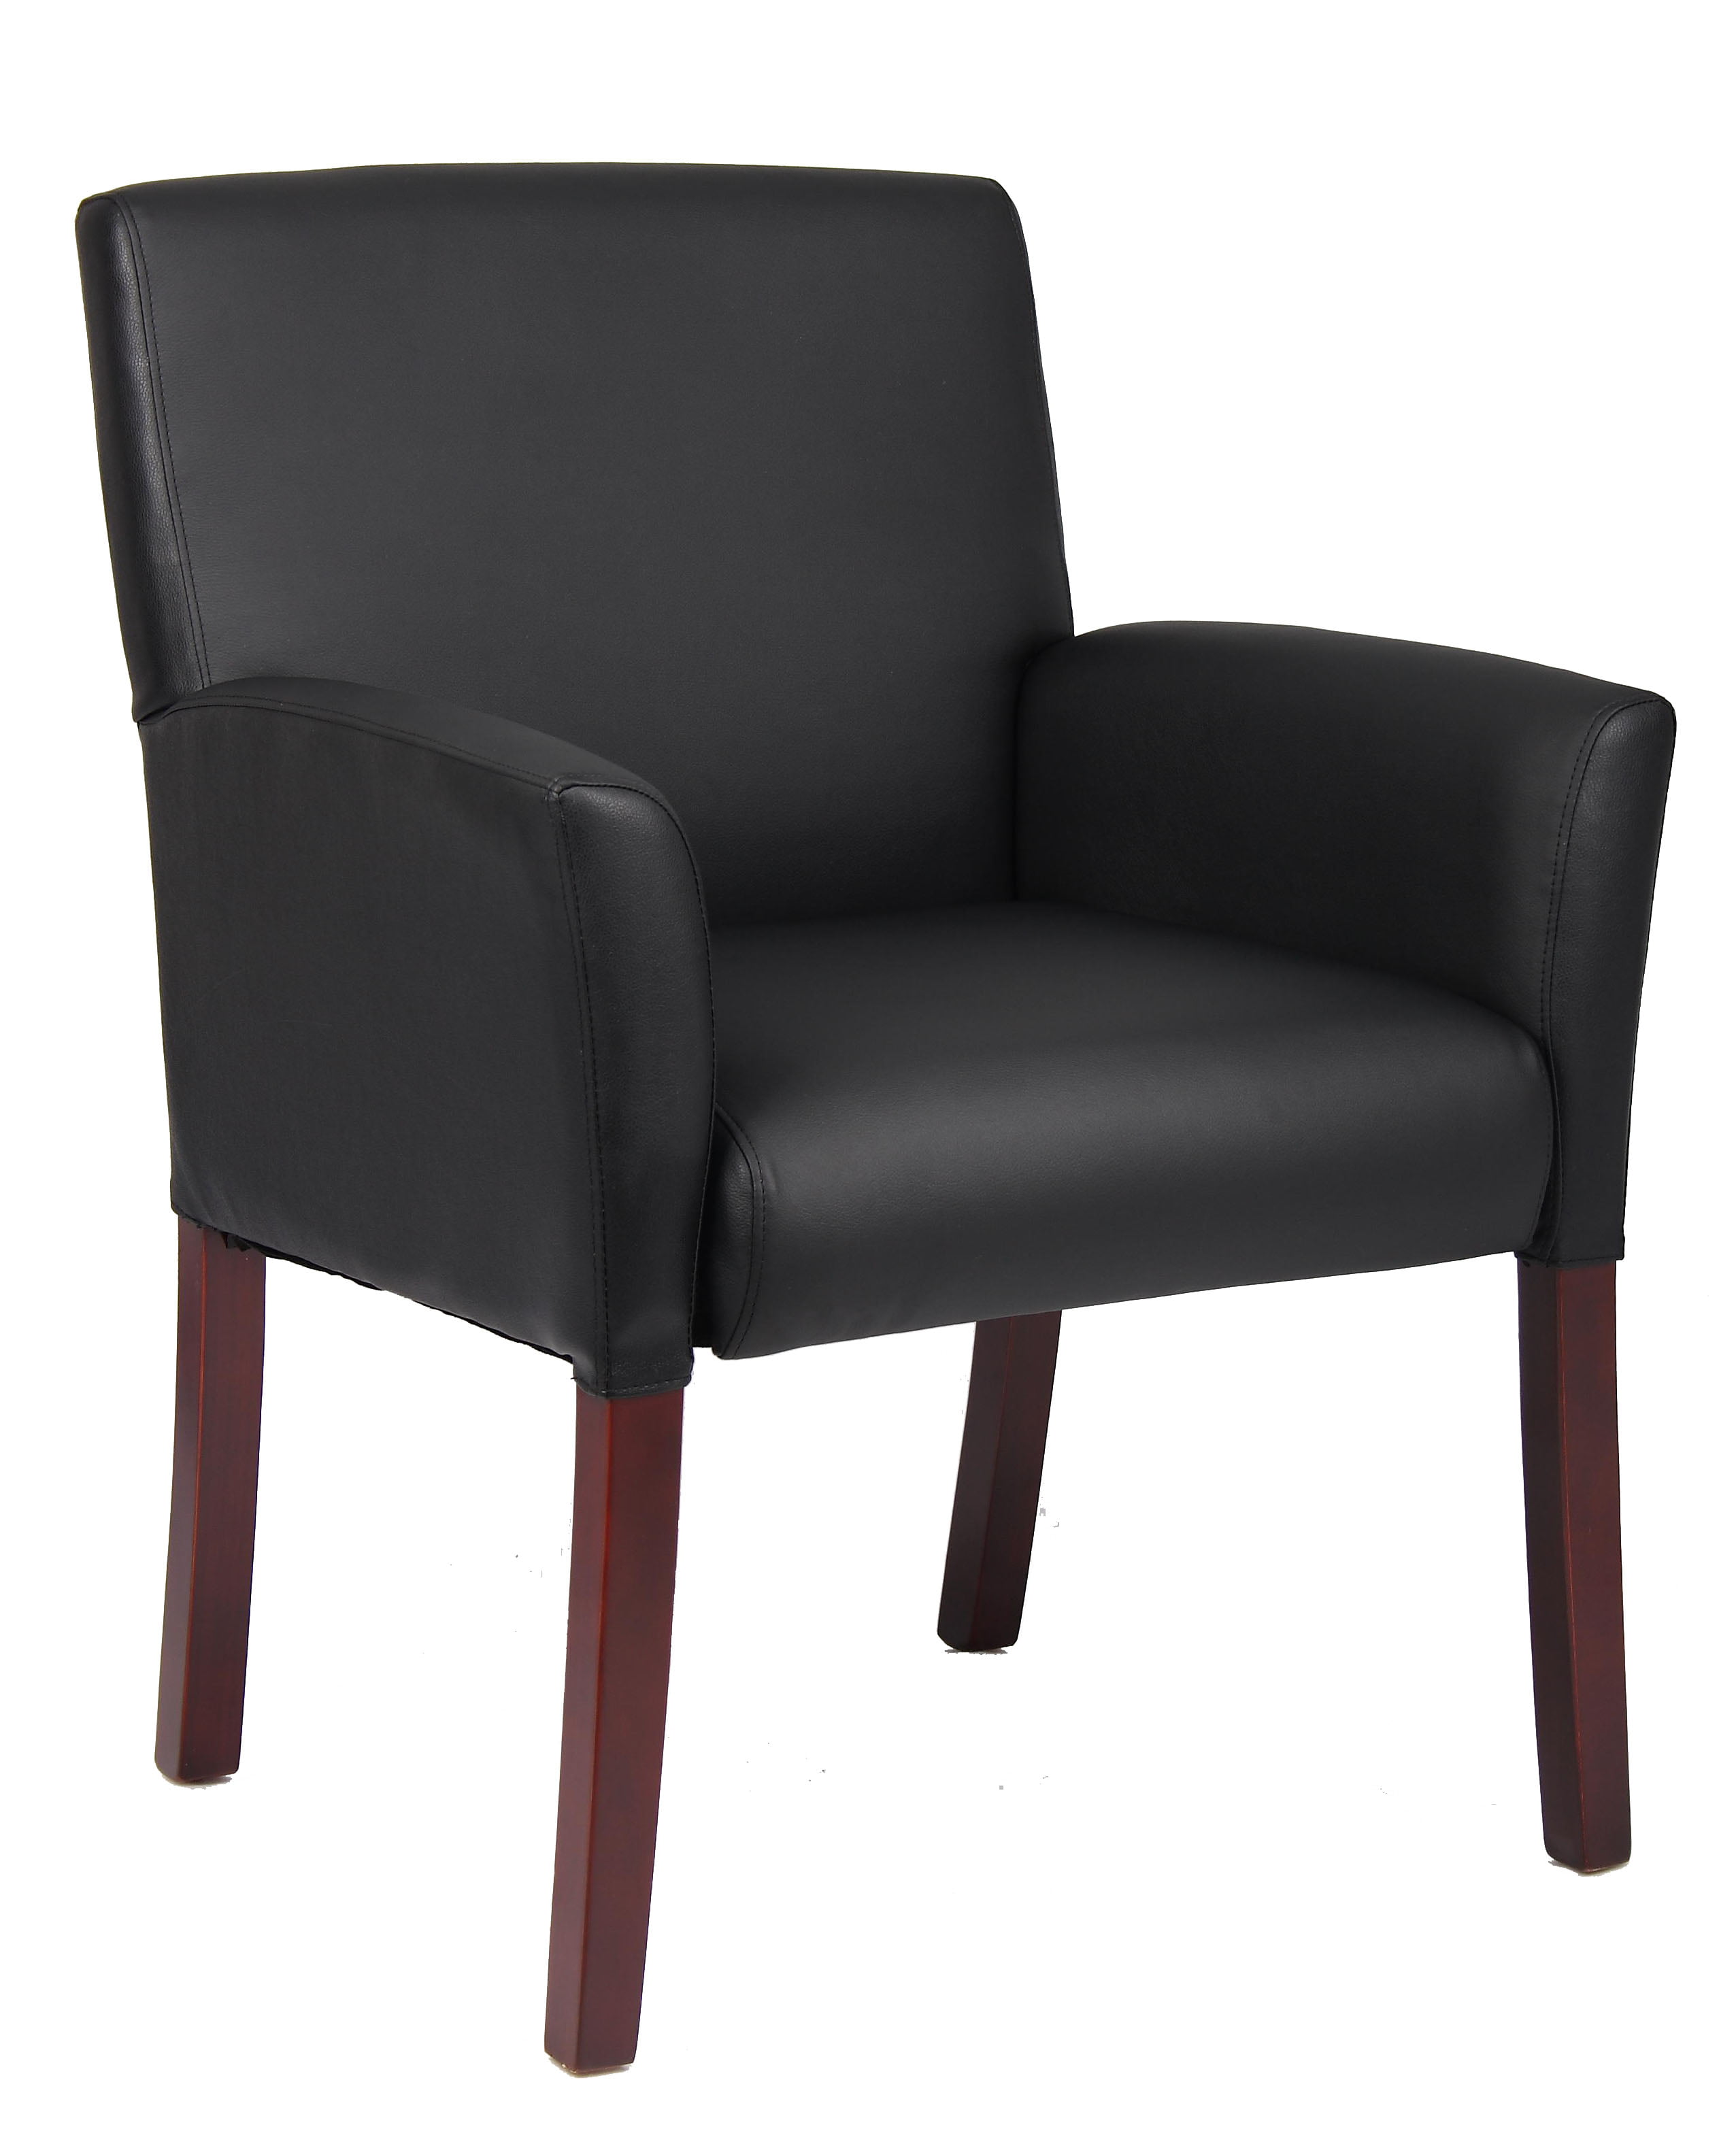 Boss Office Products Black Reception Waiting Room Chair - Walmart.com